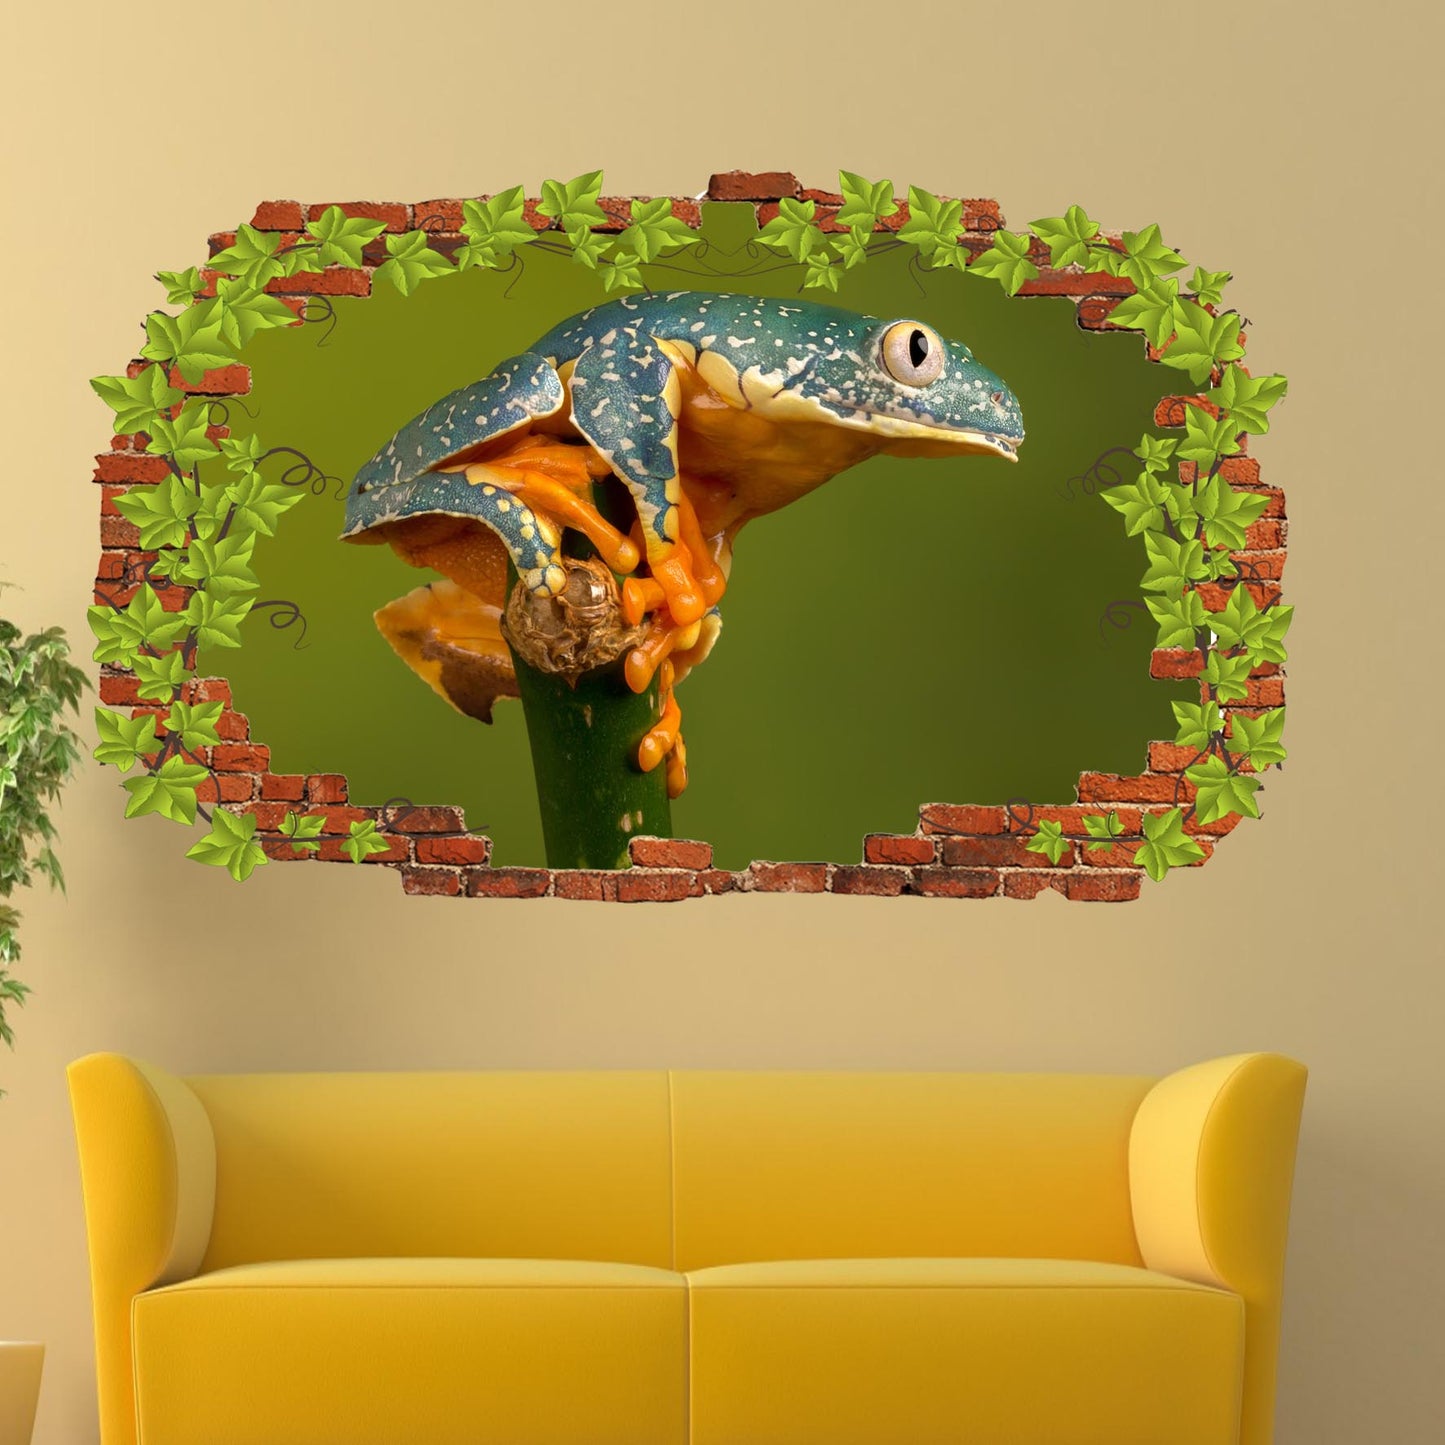 Frog Wall Sticker Poster Decal Mural